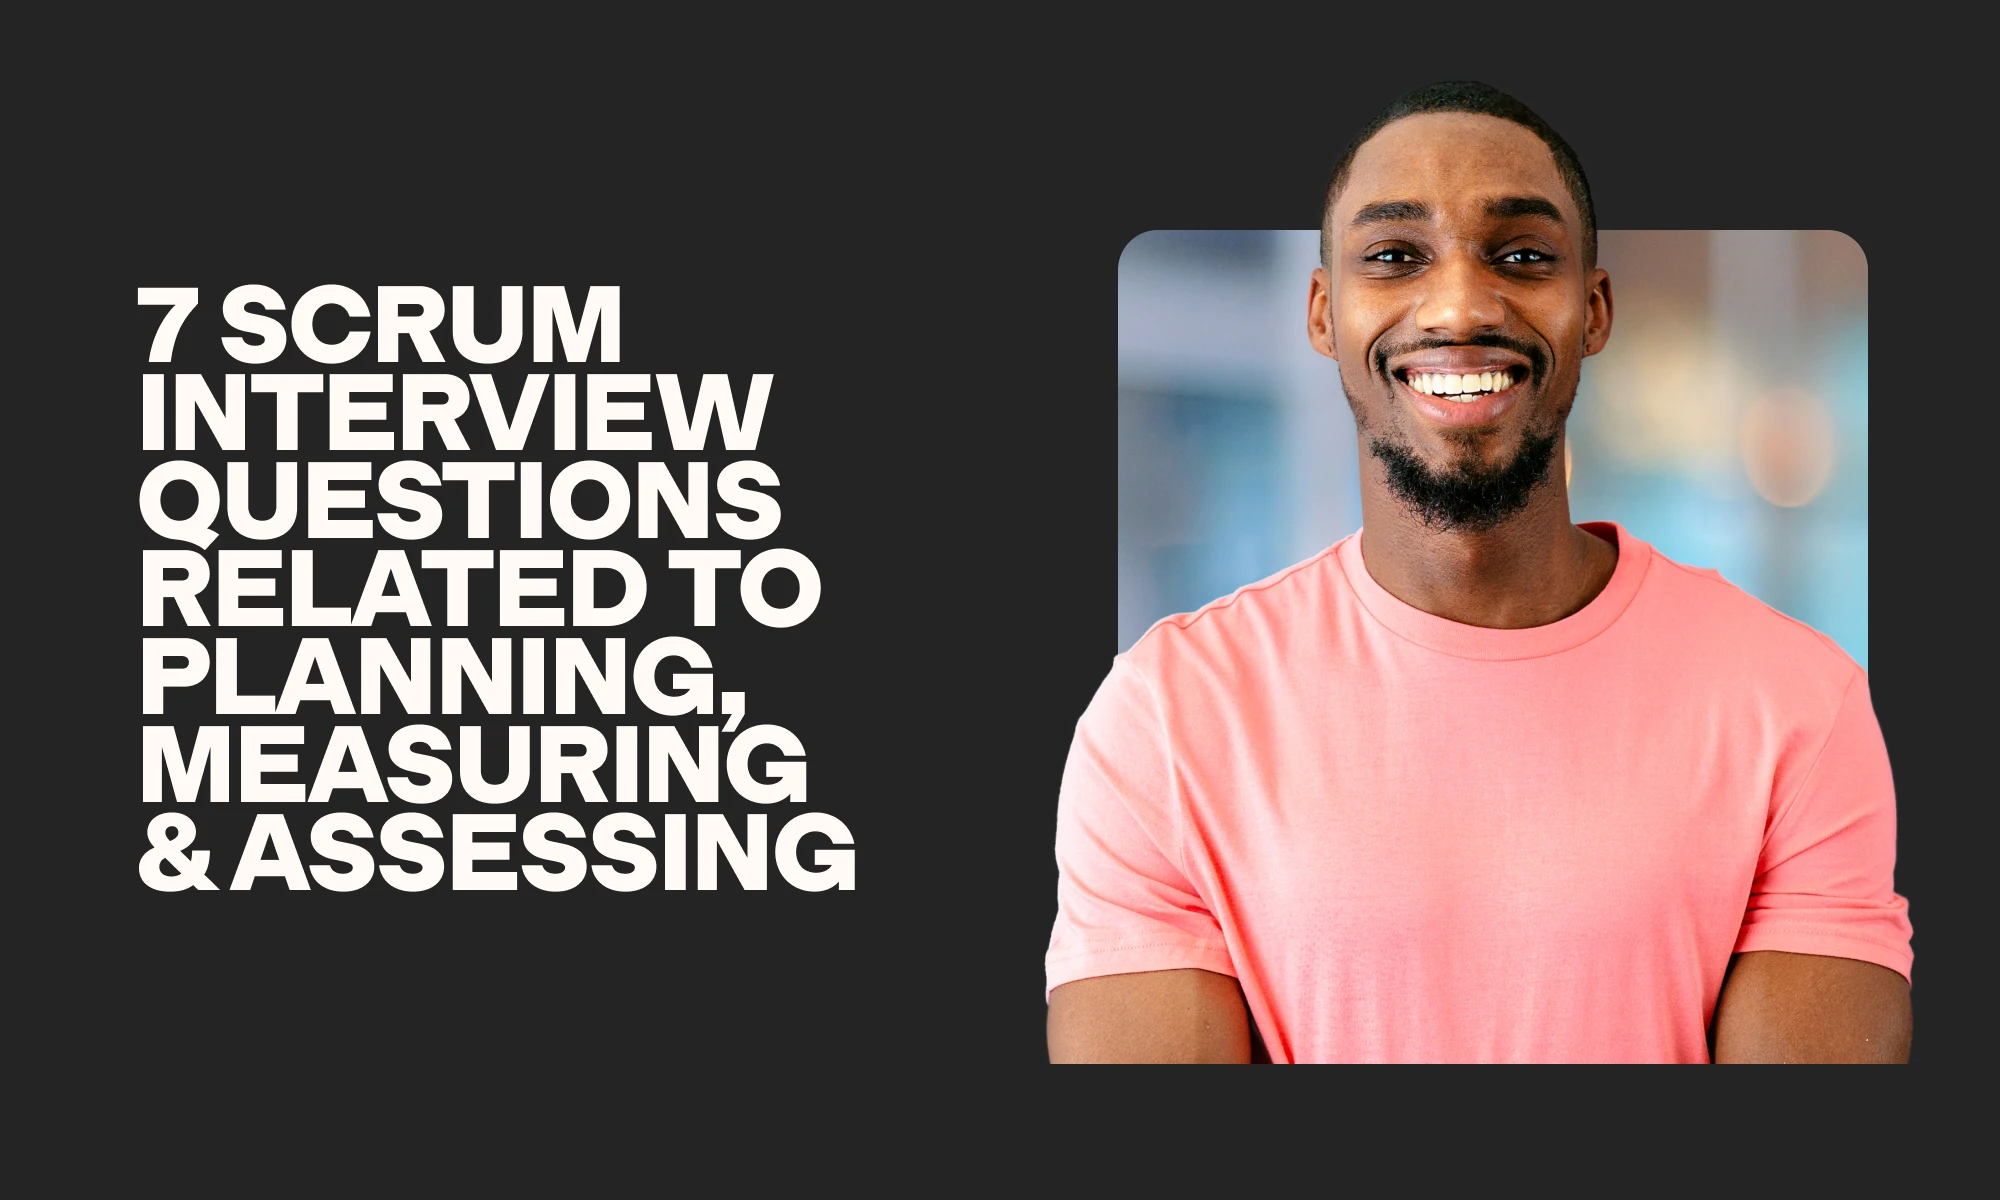 Scrum interview questions related to planning, measuring, and assessing